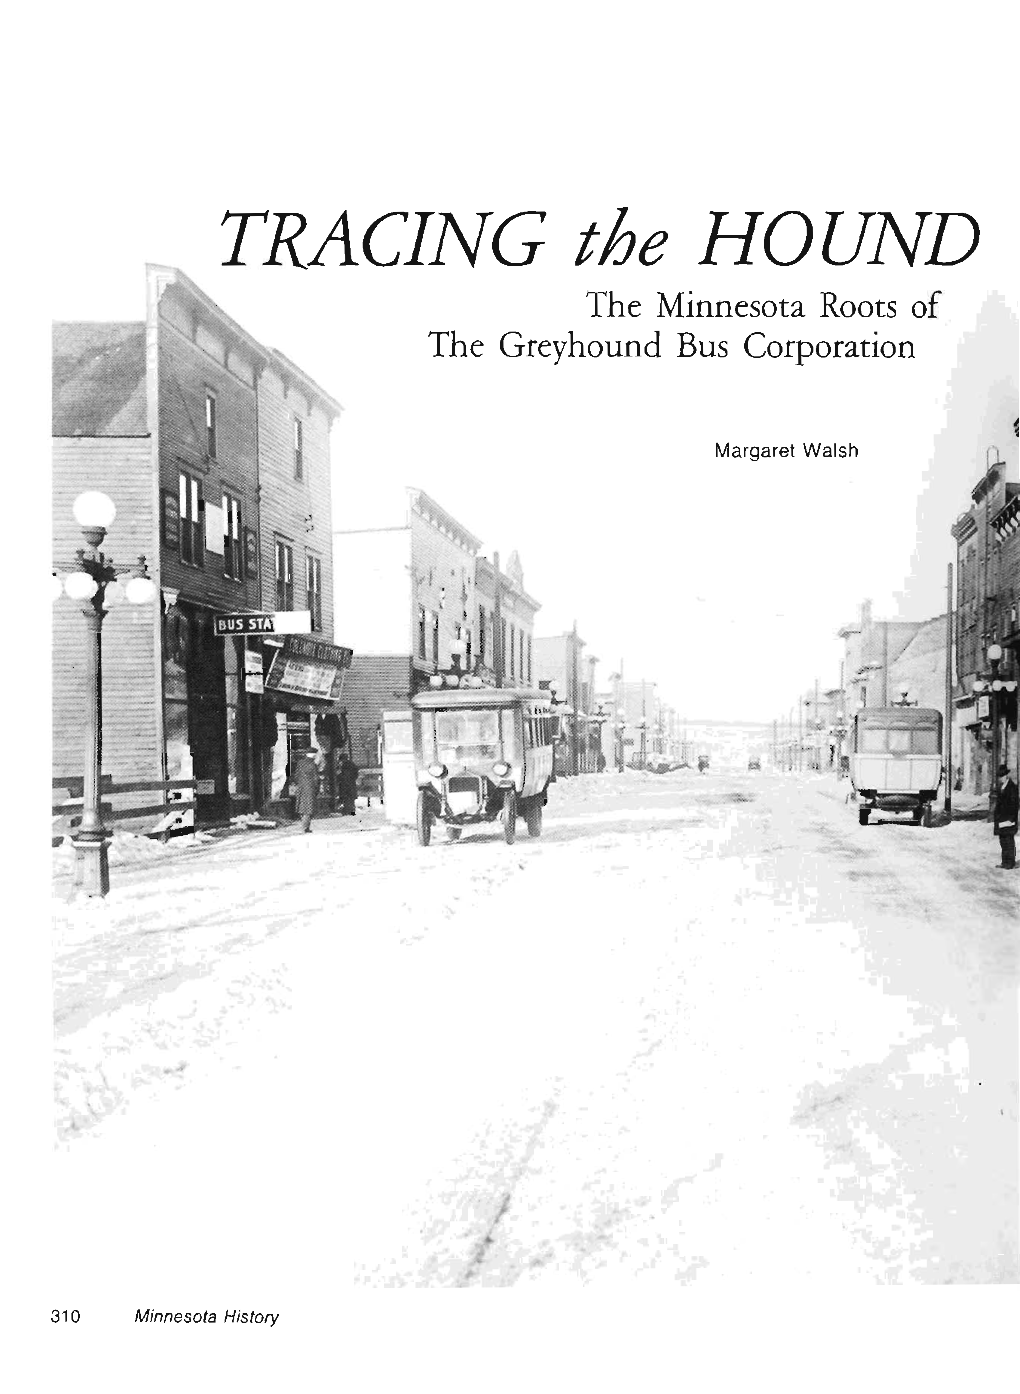 The Minnesota Roots of the Greyhound Bus Corporation / Margaret Walsh